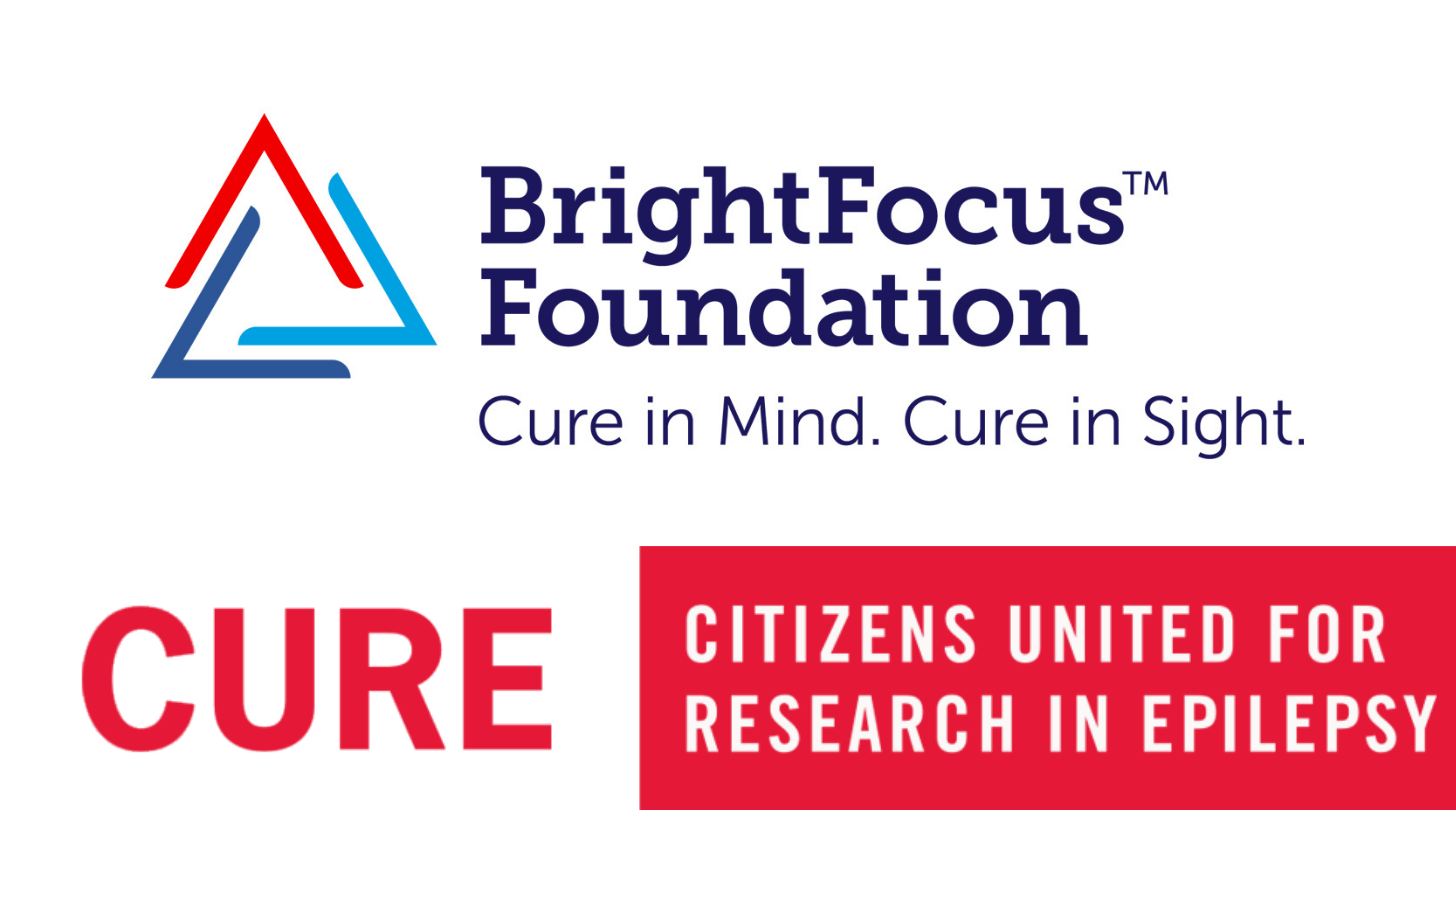 Logos for the Bright Focus Foundation and CURE (Citizens United for Research in Epilepsy)